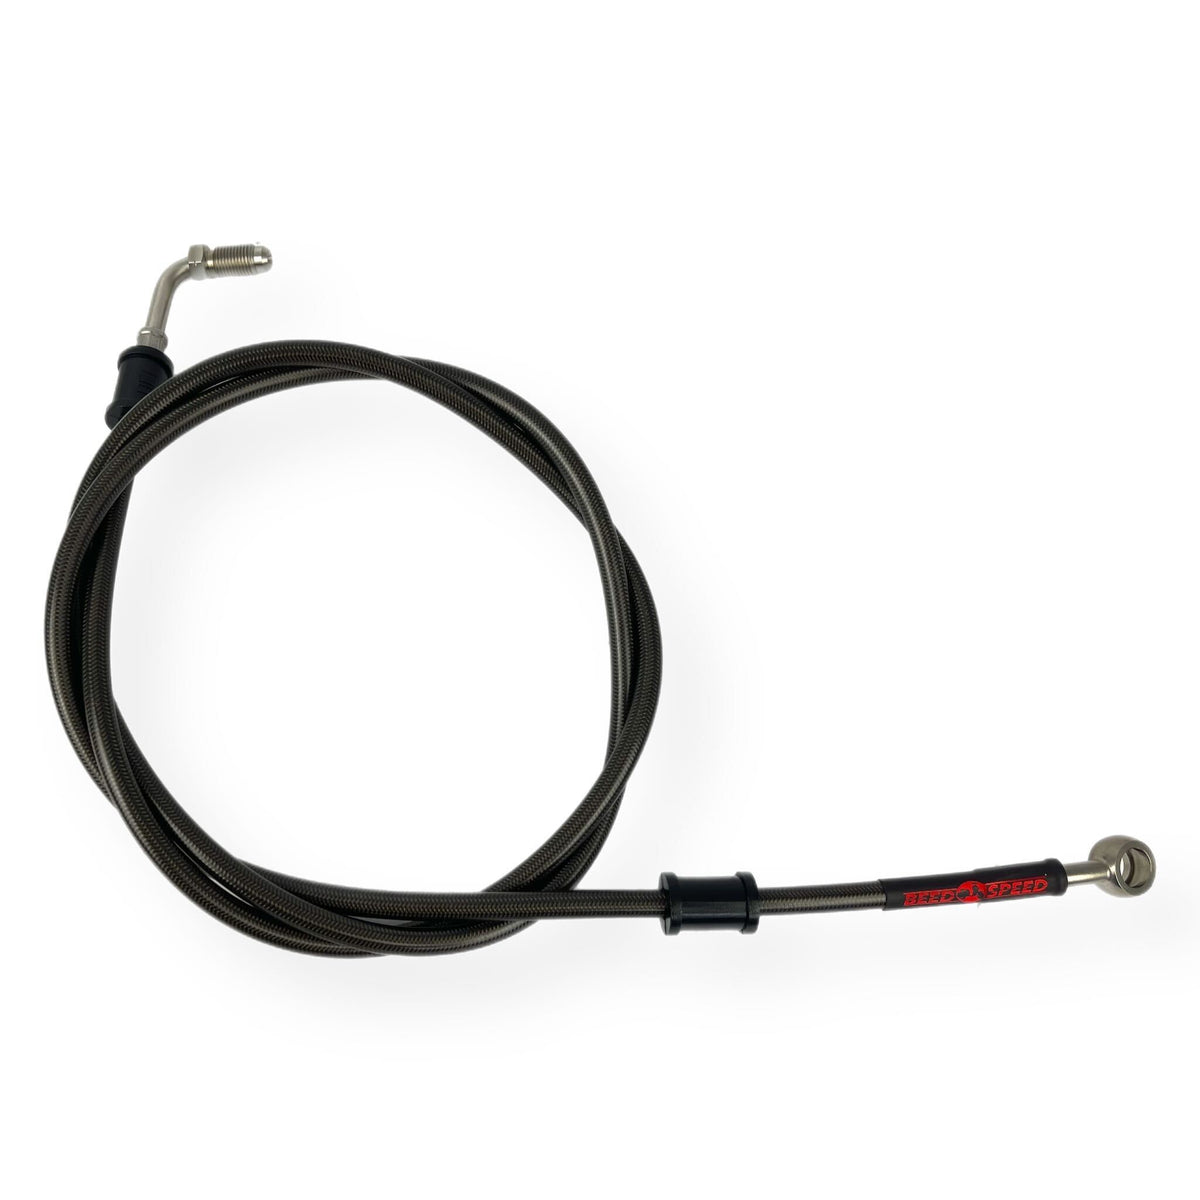 Vespa PX Disc LML HEL Stainless Hydraulic Front Brake Hose - Carbon